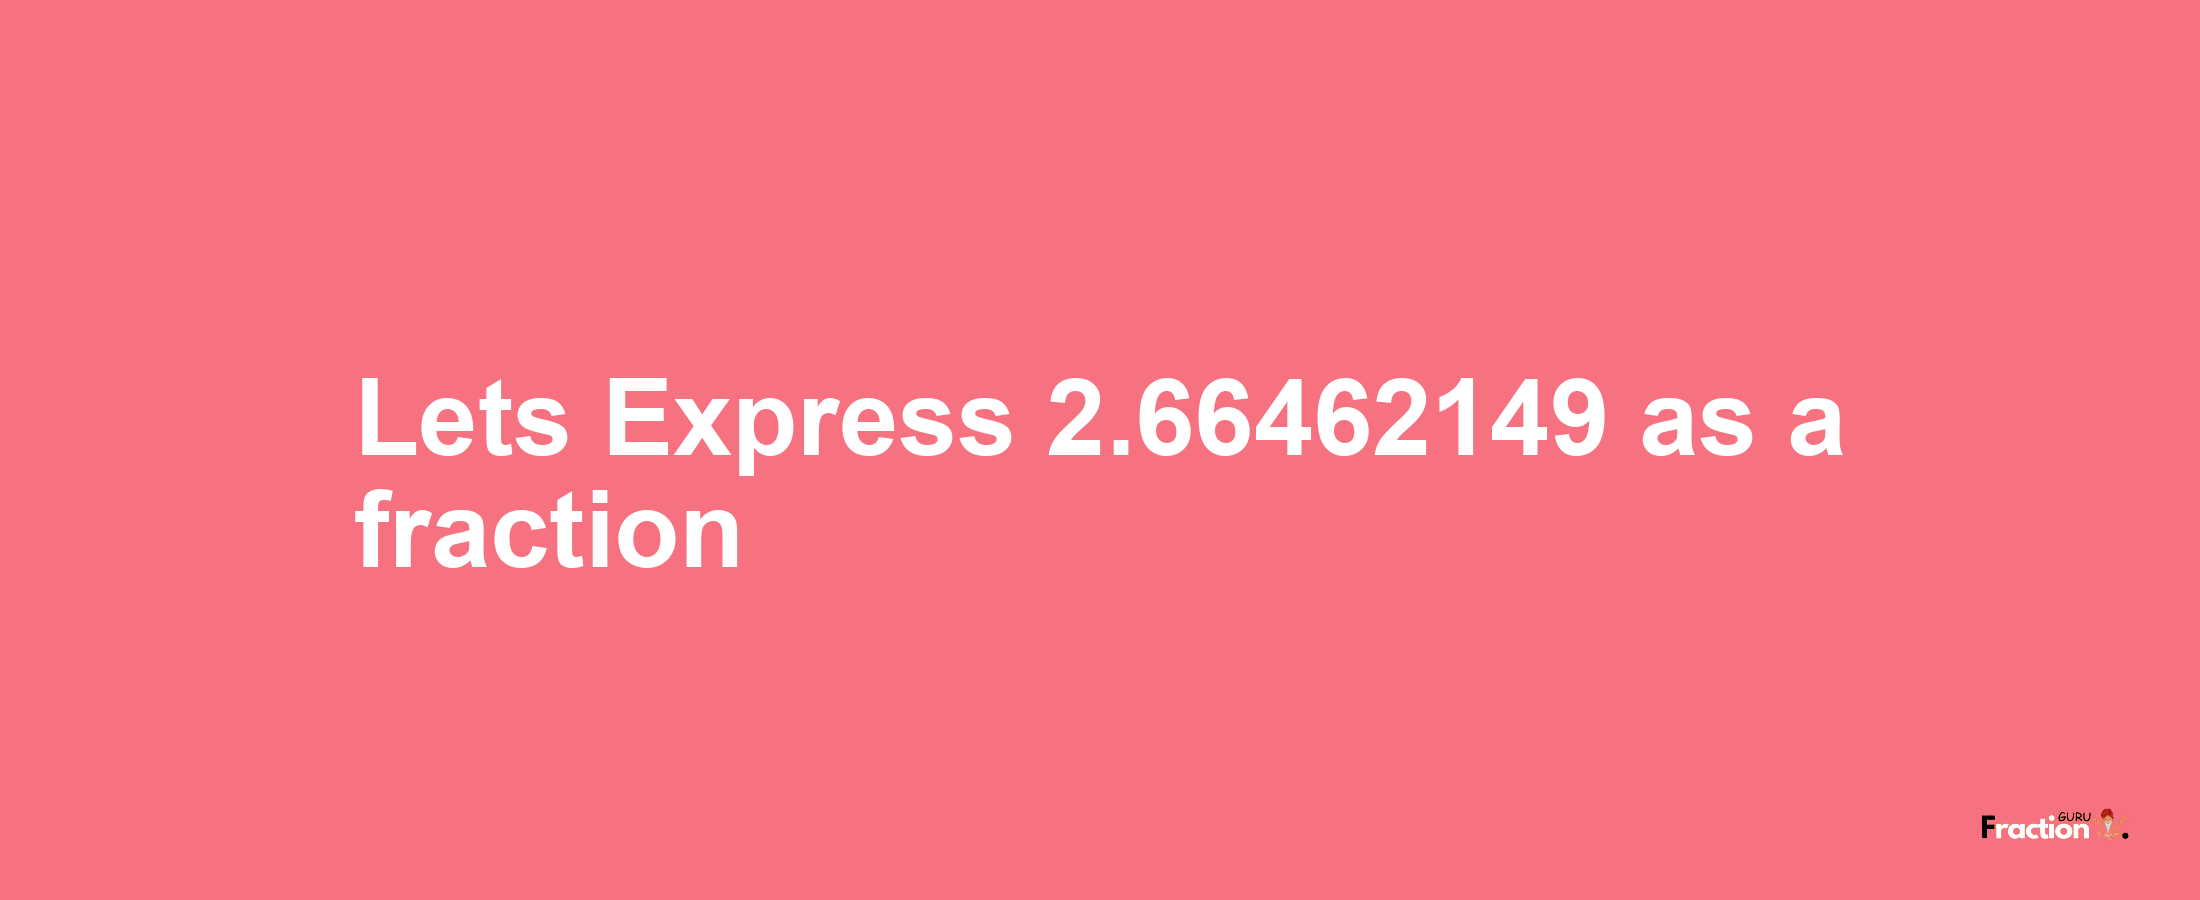 Lets Express 2.66462149 as afraction